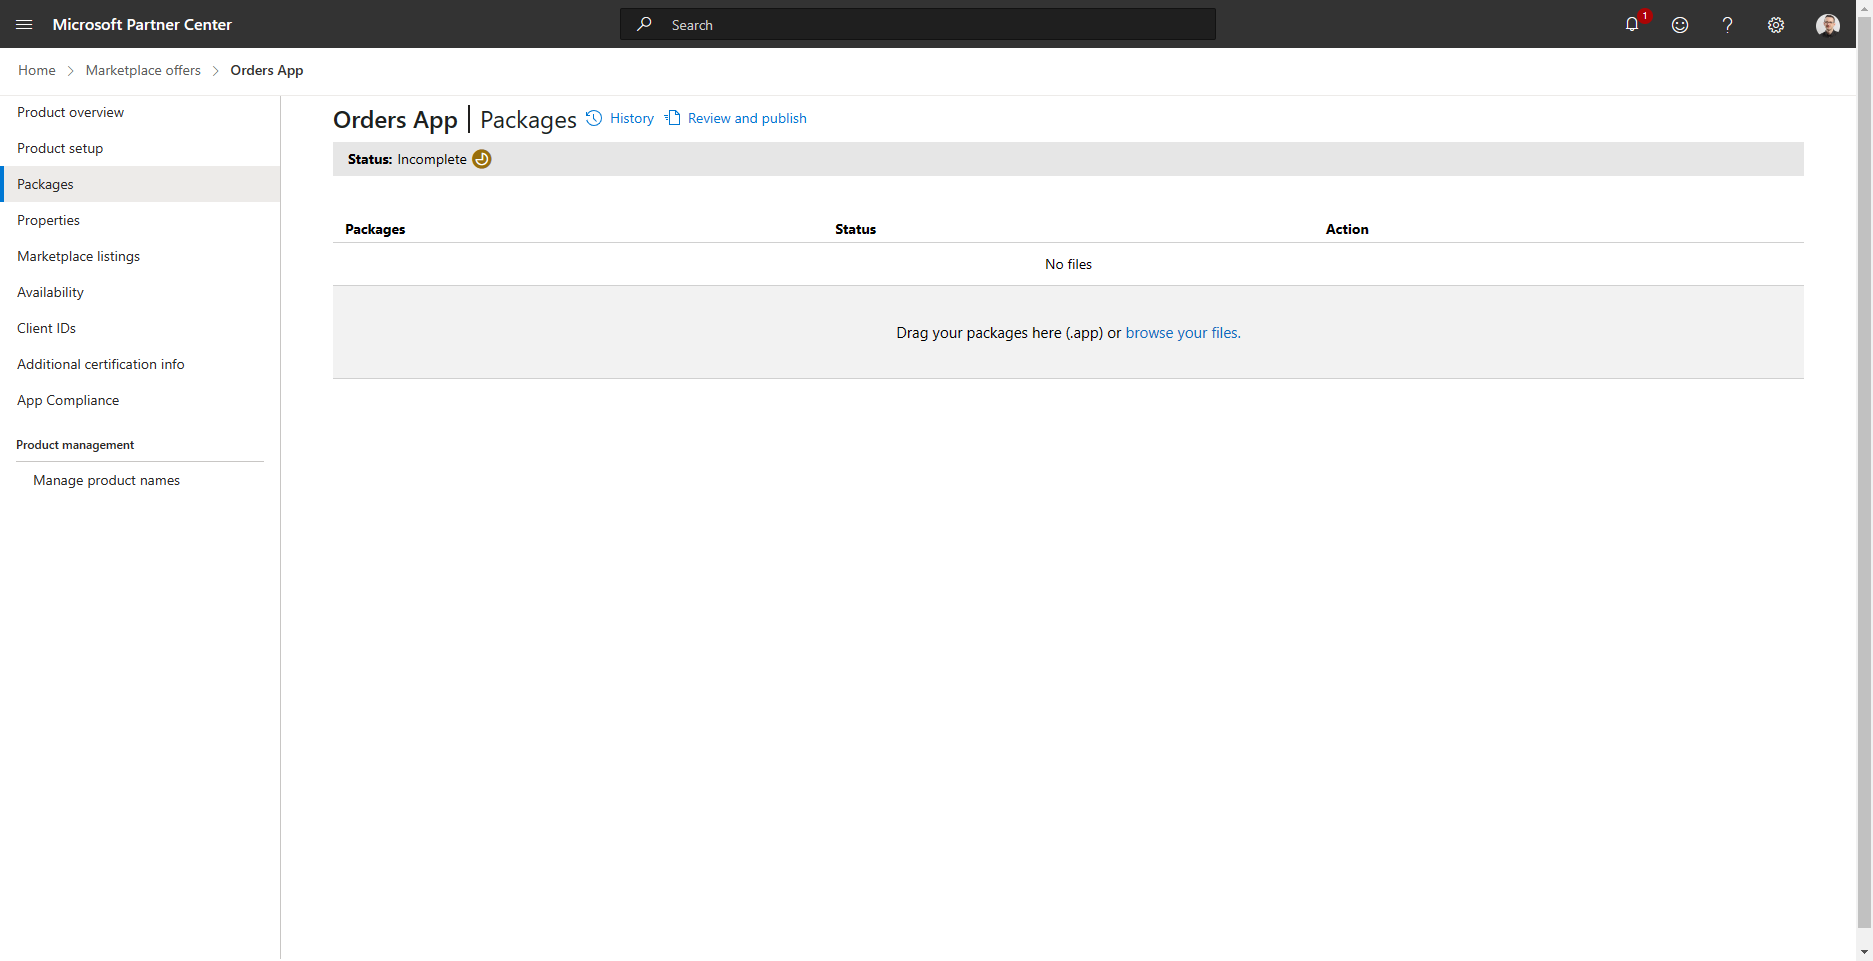 The product configuration step about "Packages". You can use it to upload the packages of your product.